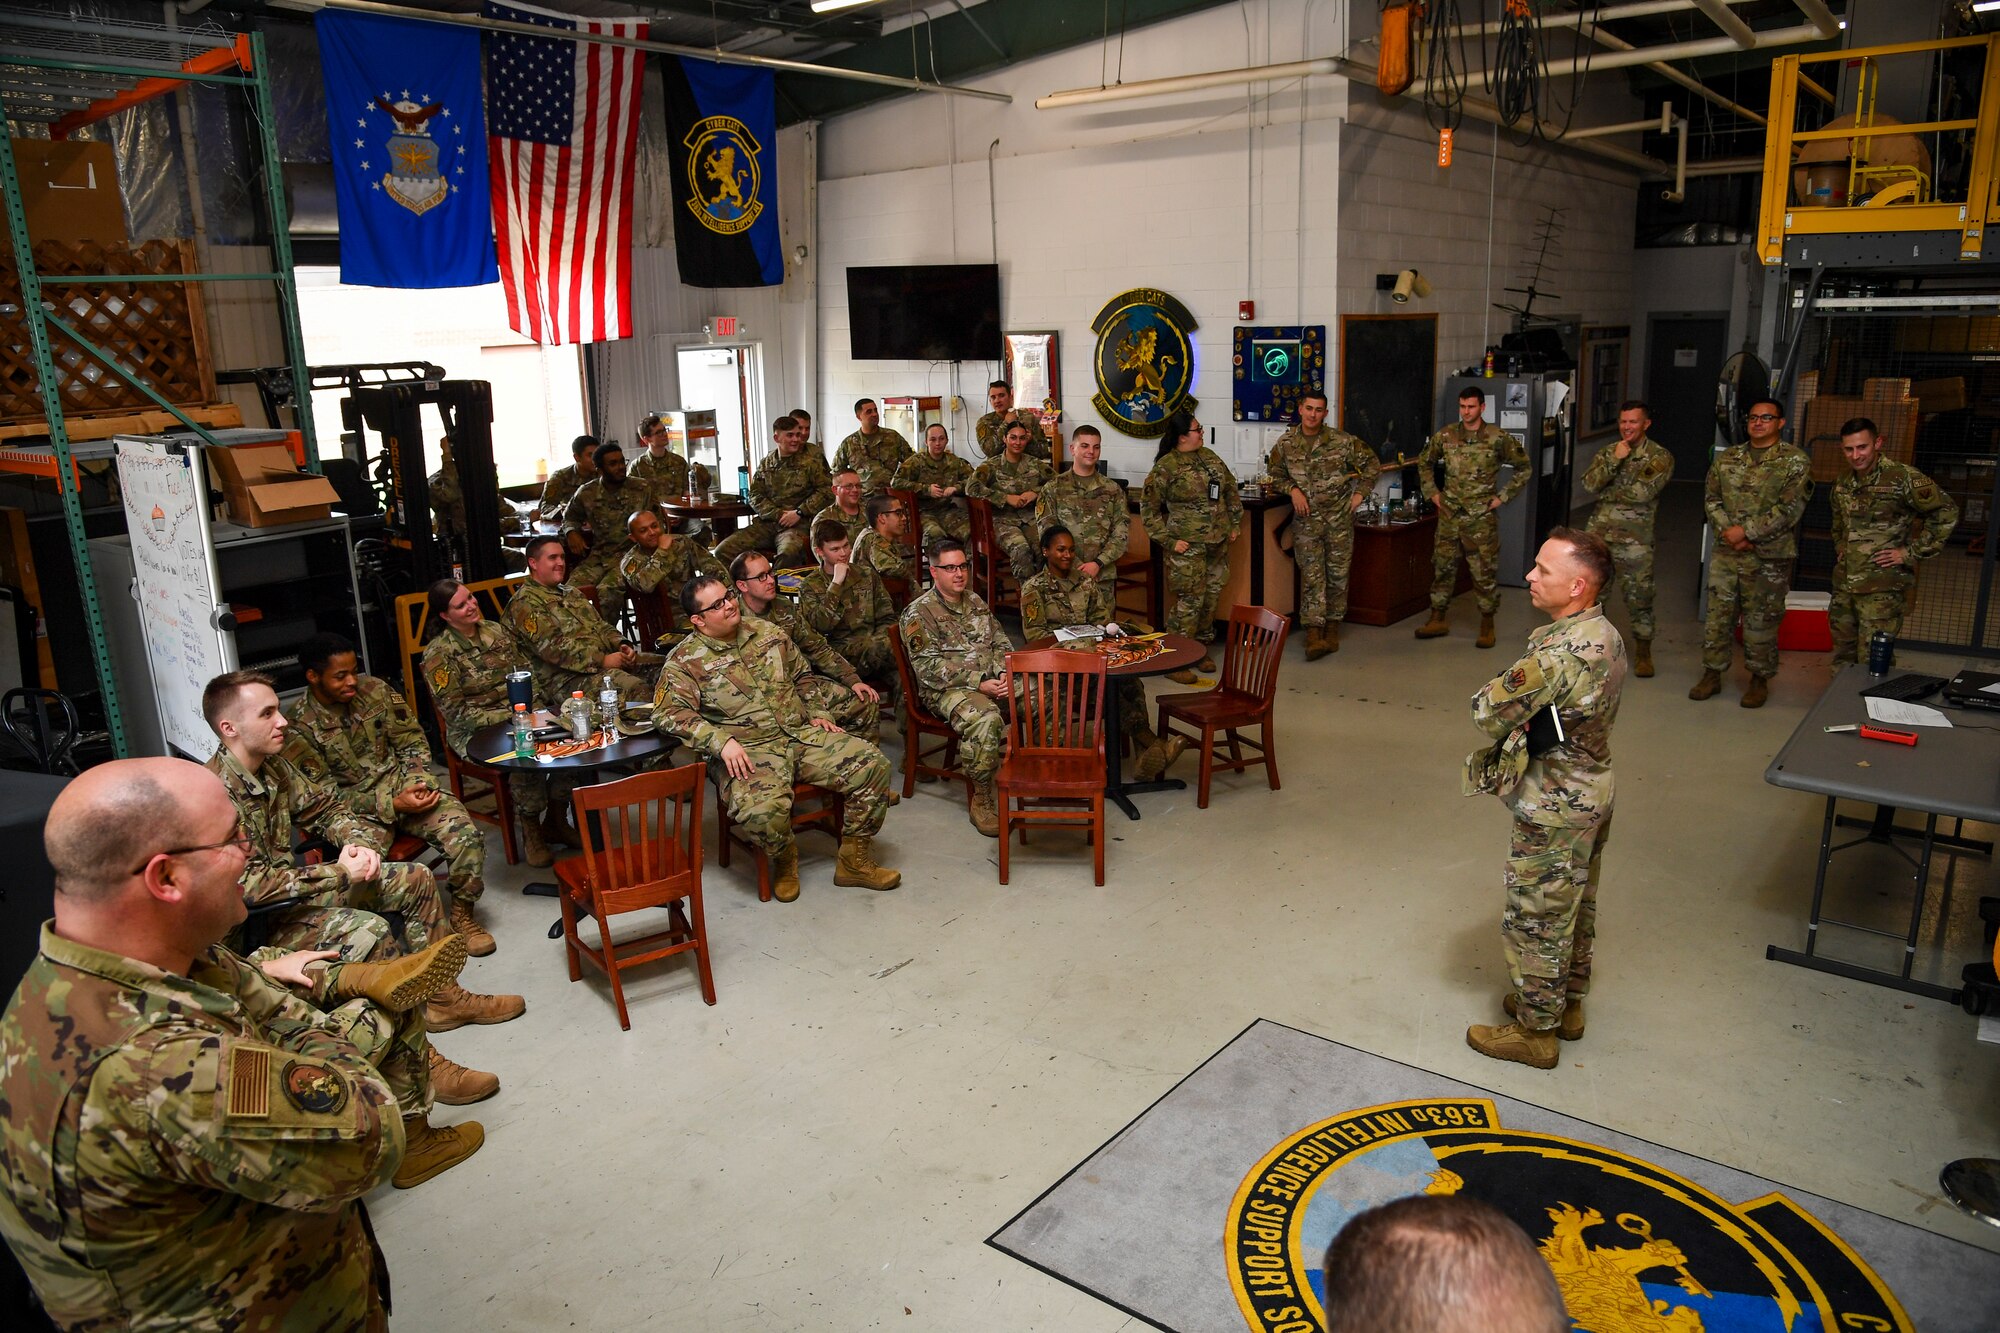 A Command Chief talks to a room full of Airmen.